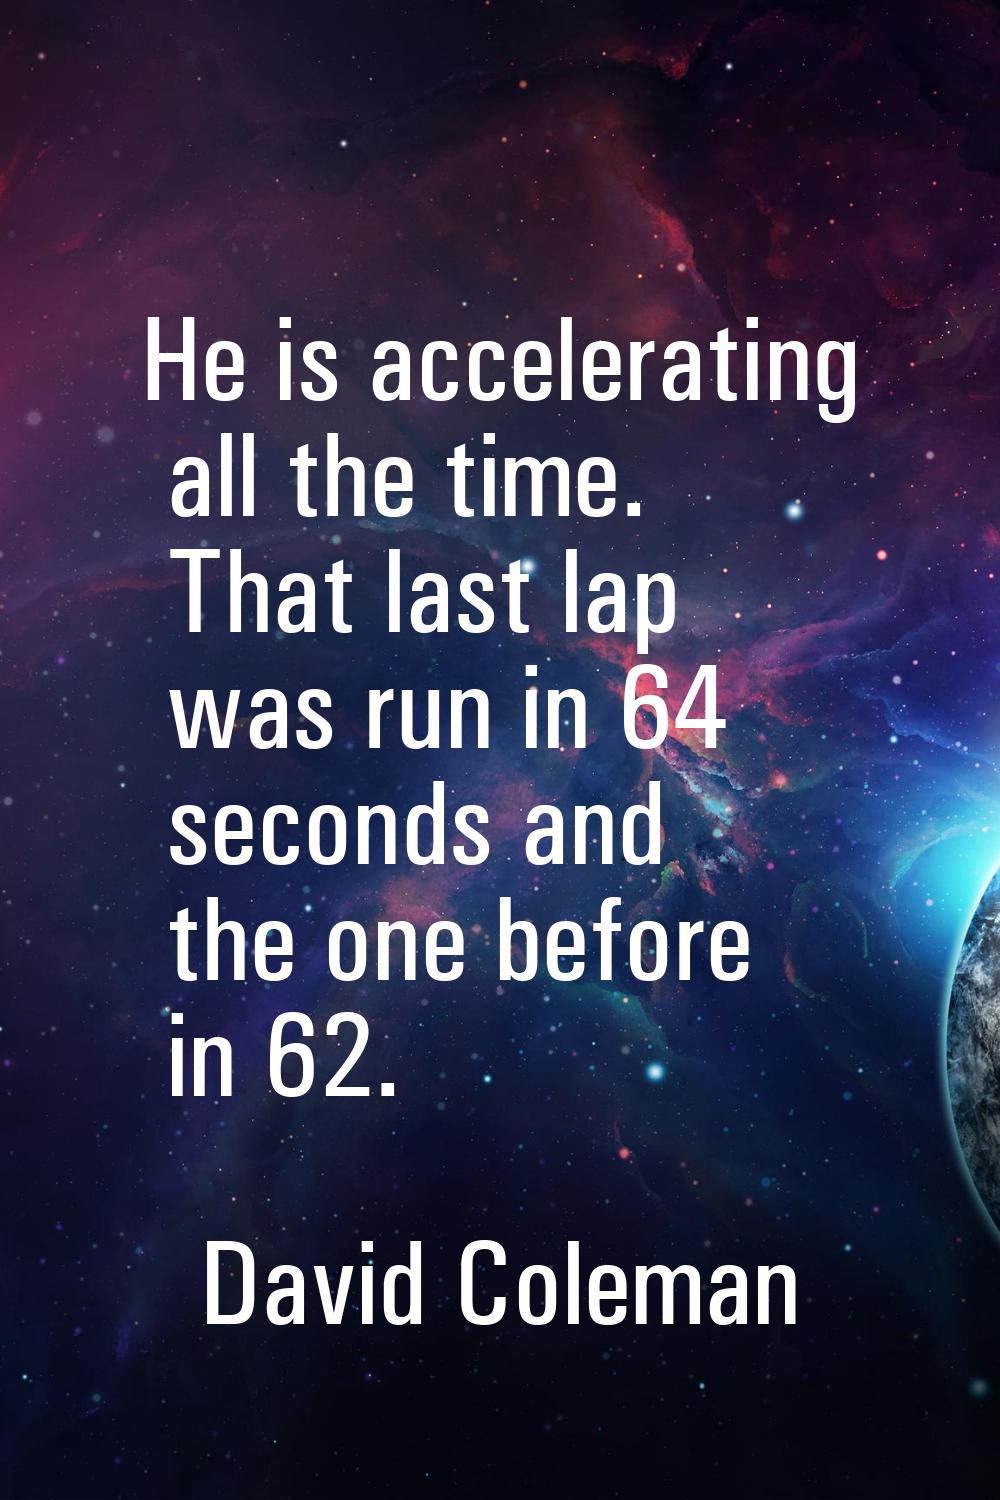 He is accelerating all the time. That last lap was run in 64 seconds and the one before in 62.